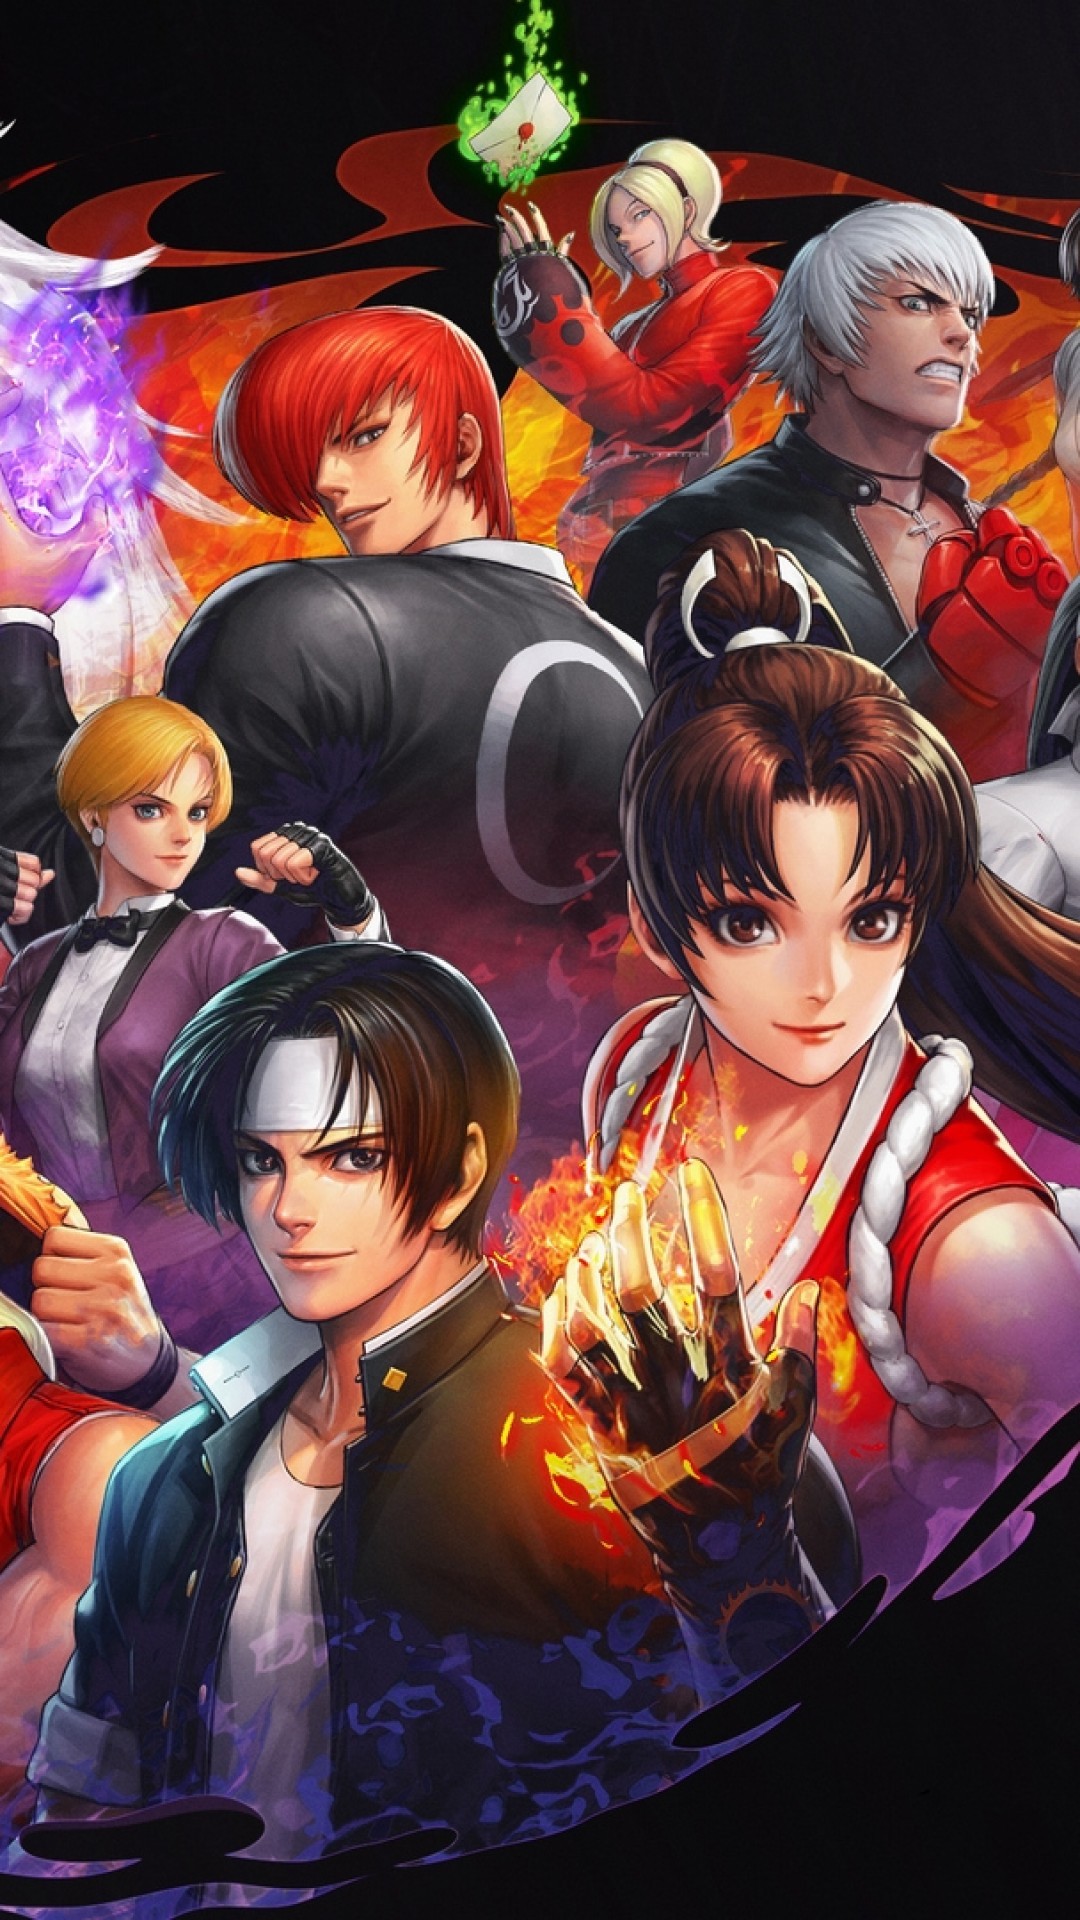 Download 1080x1920 Kyo Kusanagi, Snk, Iori Yagami, King Of Fighters, Fighting Games Wallpaper for iPhone iPhone 7 Plus, iPhone 6+, Sony Xperia Z, HTC One